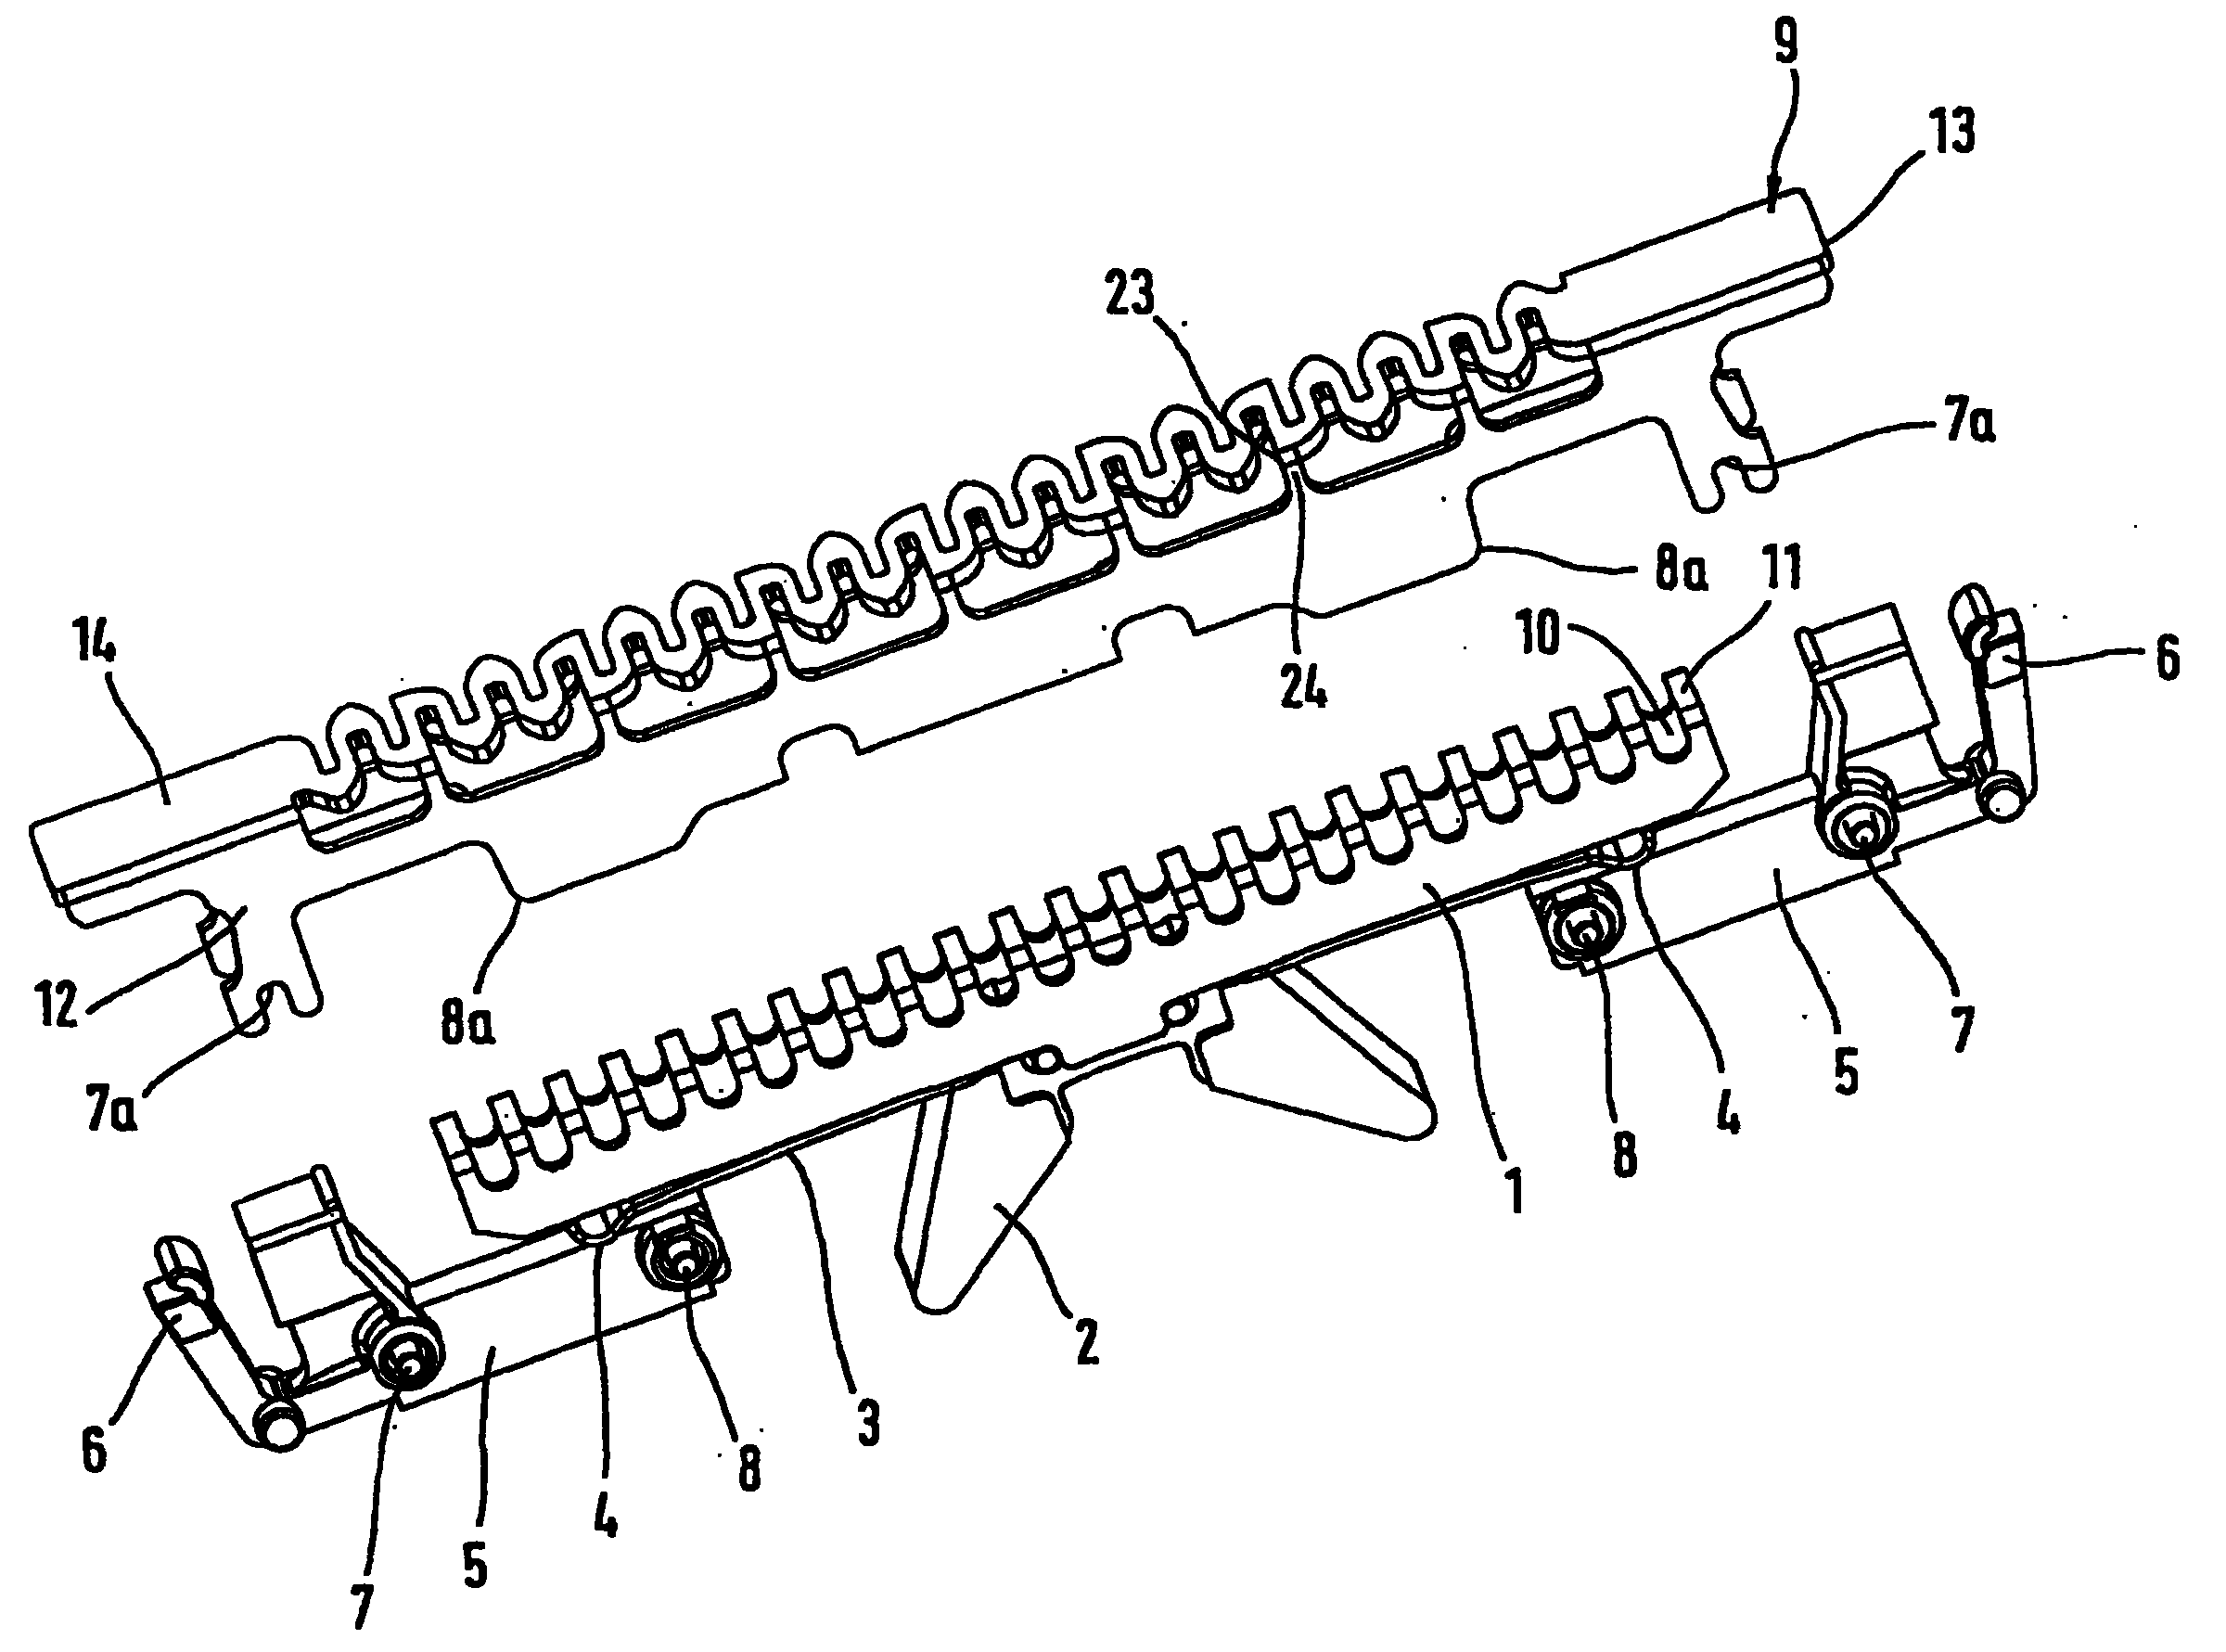 Shearing head for hair clippers